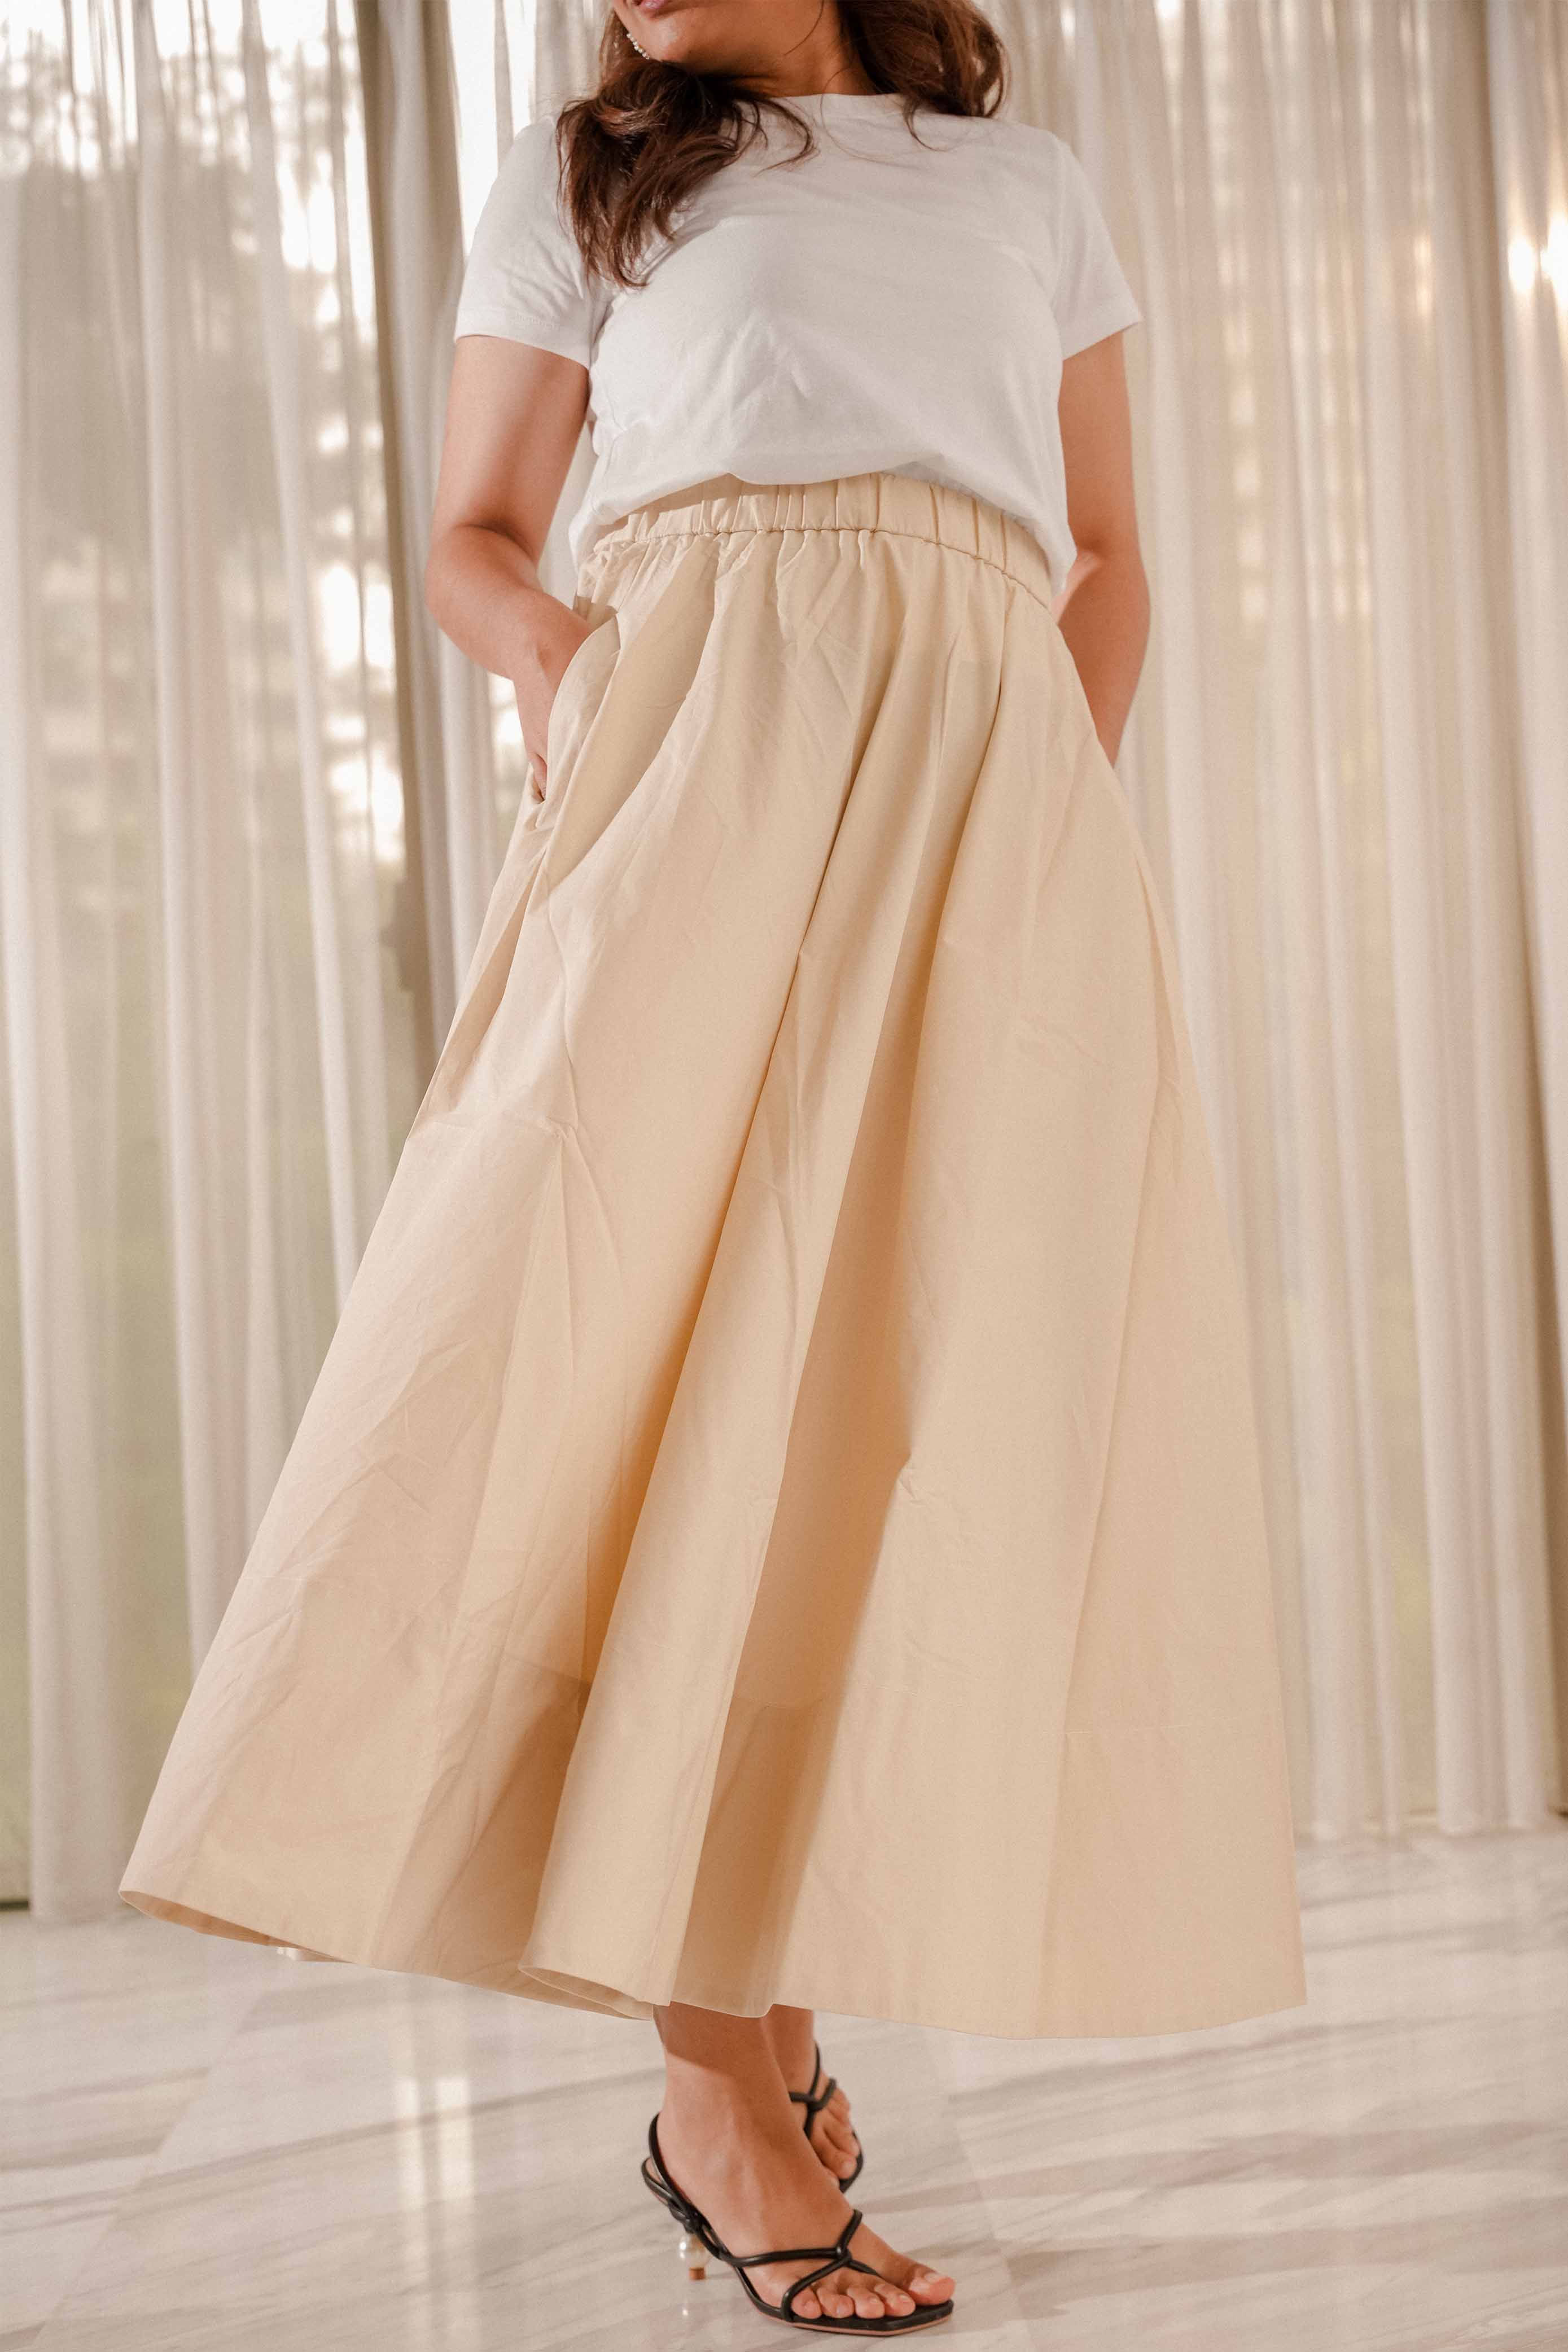 female model in high quality white top and light brown skirt by petit moi